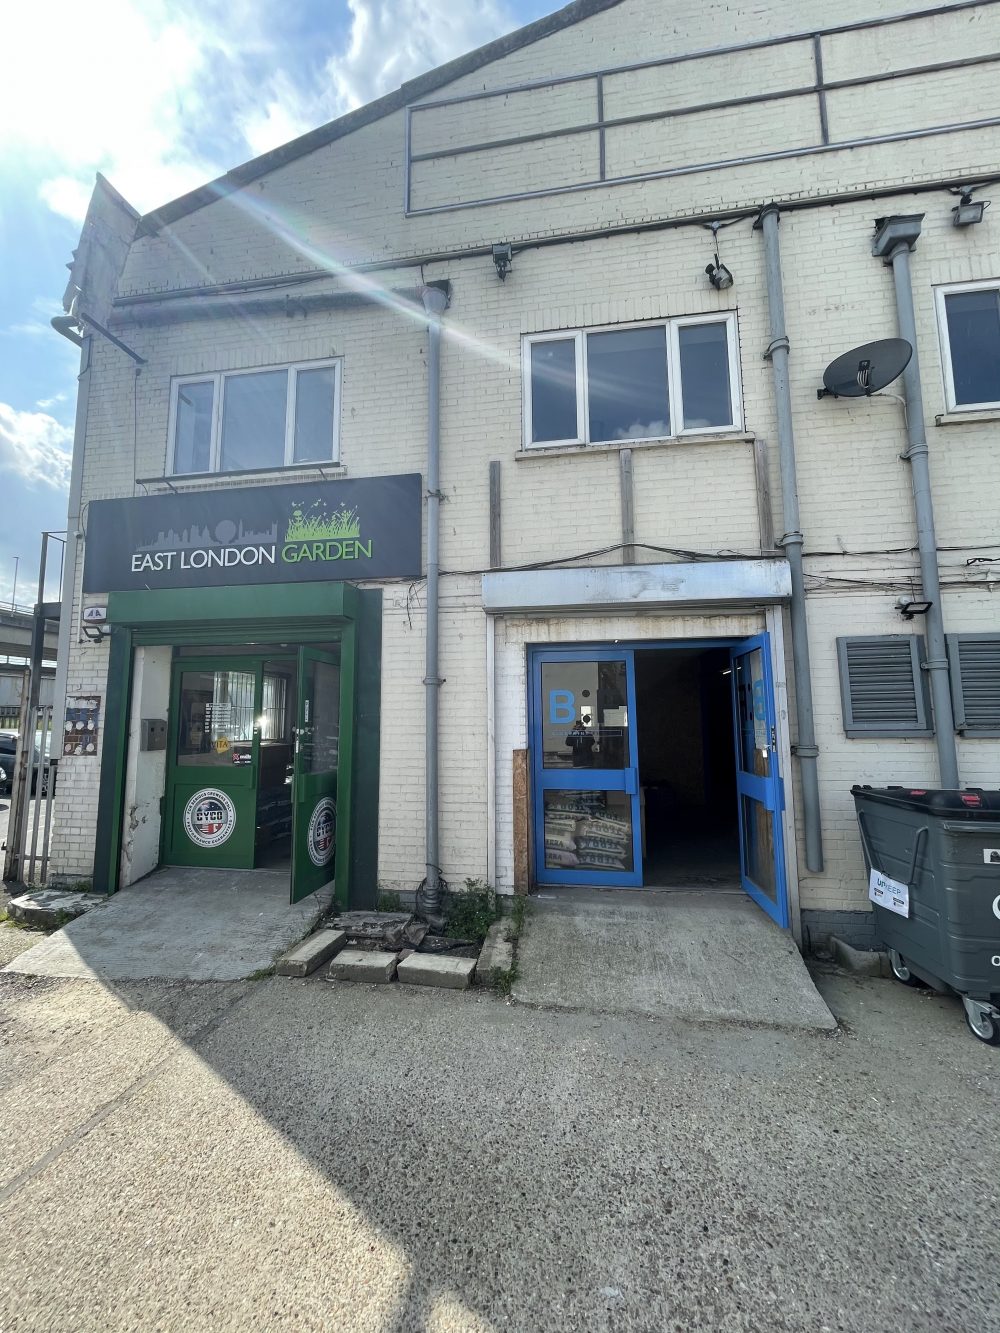 E18 735sq ft ground floor warehouse unit to rent with 24 hour access2